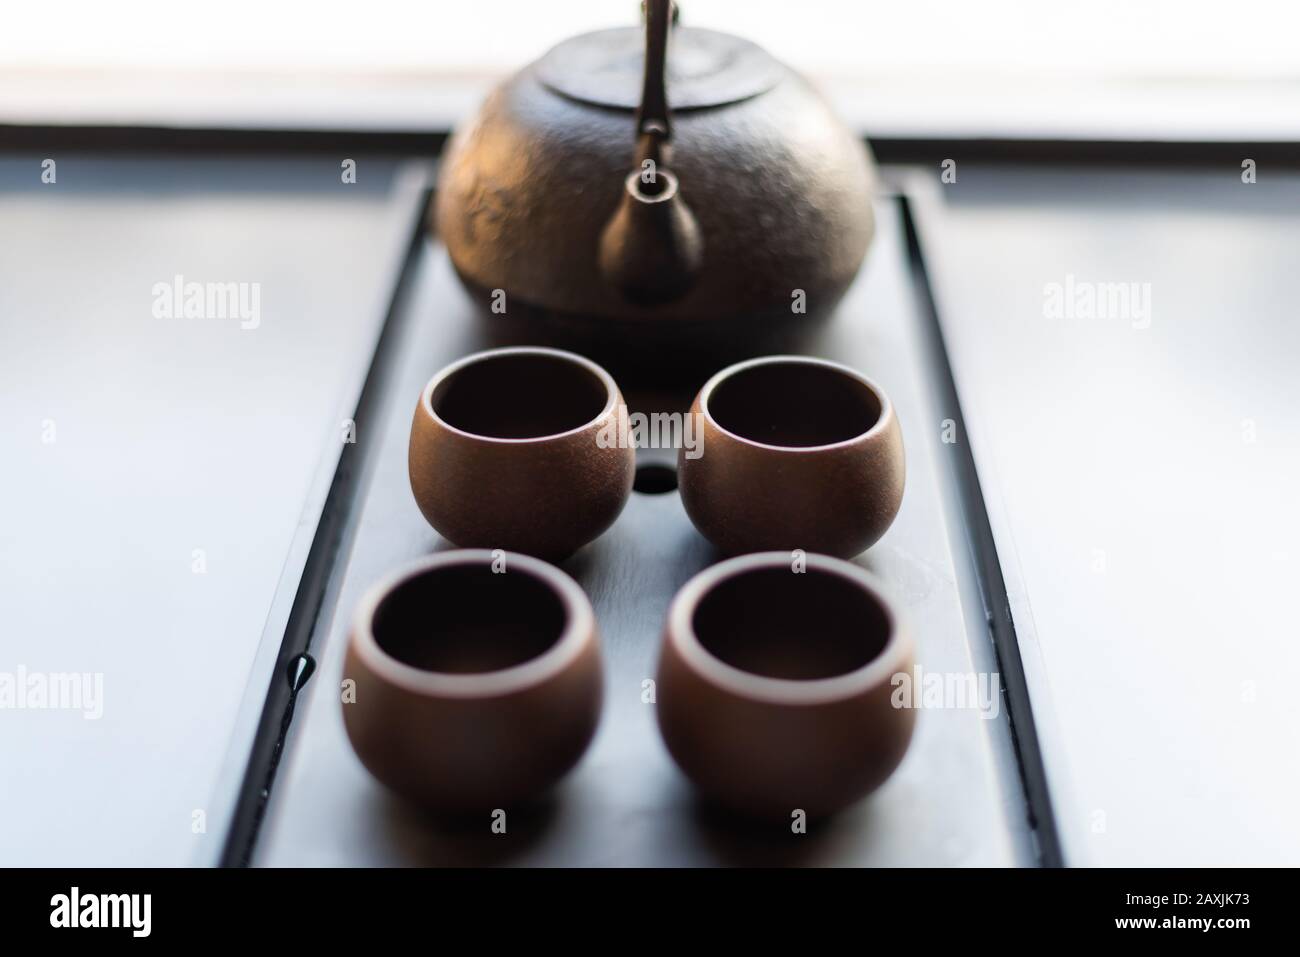 Traditional Chinese tea Set up with ceramic tea cups Stock Photo